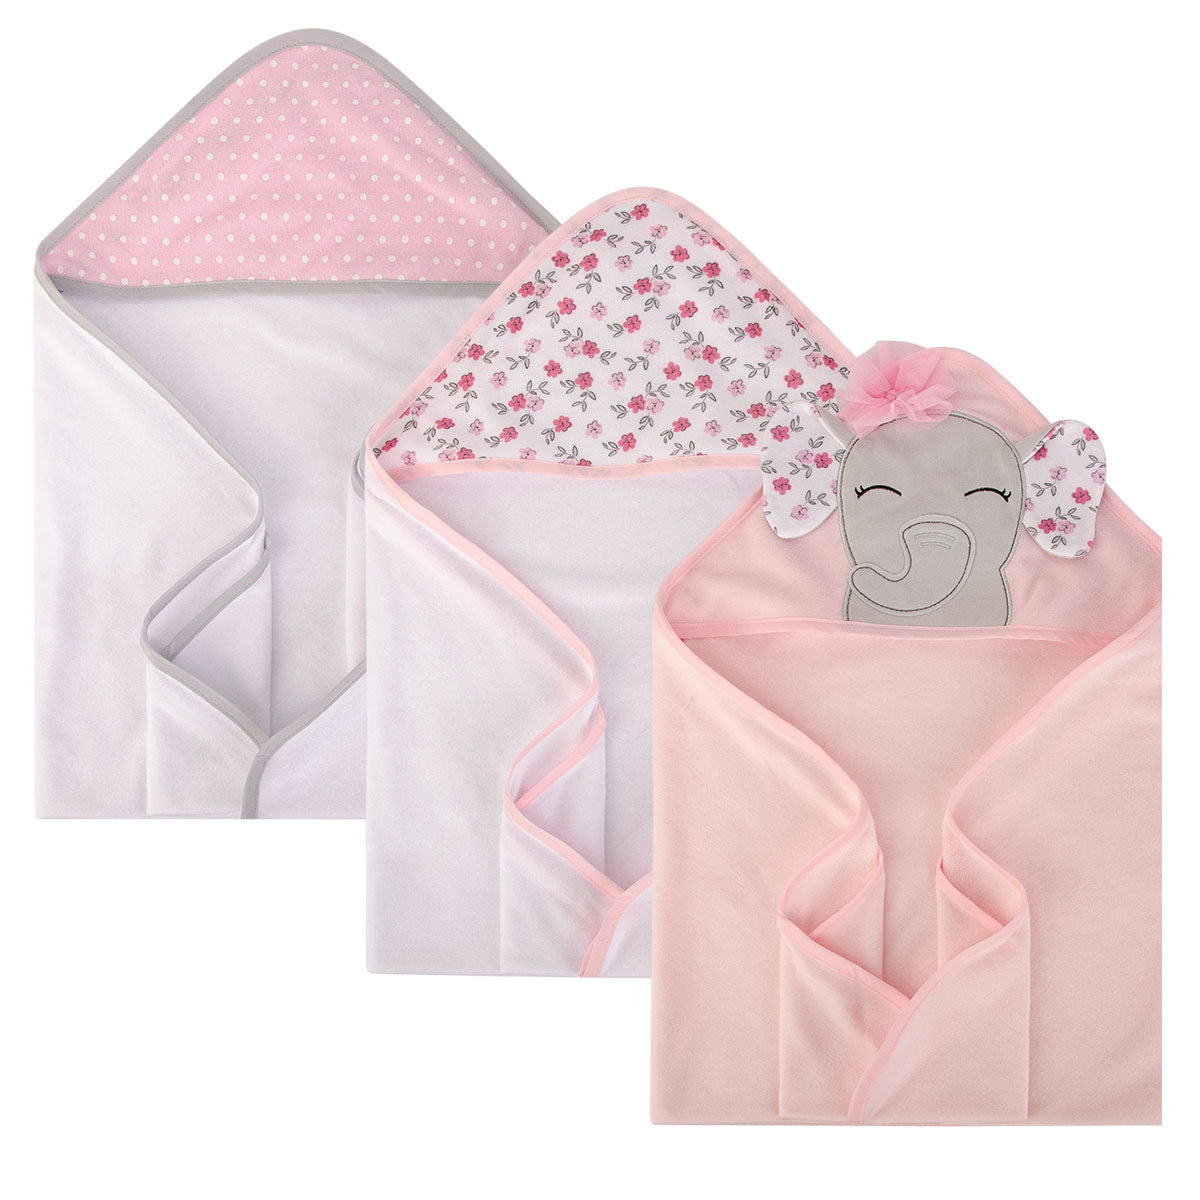 Hudson Baby - Knit Terry Hooded Towel 3pc - Floral Pretty Elephant